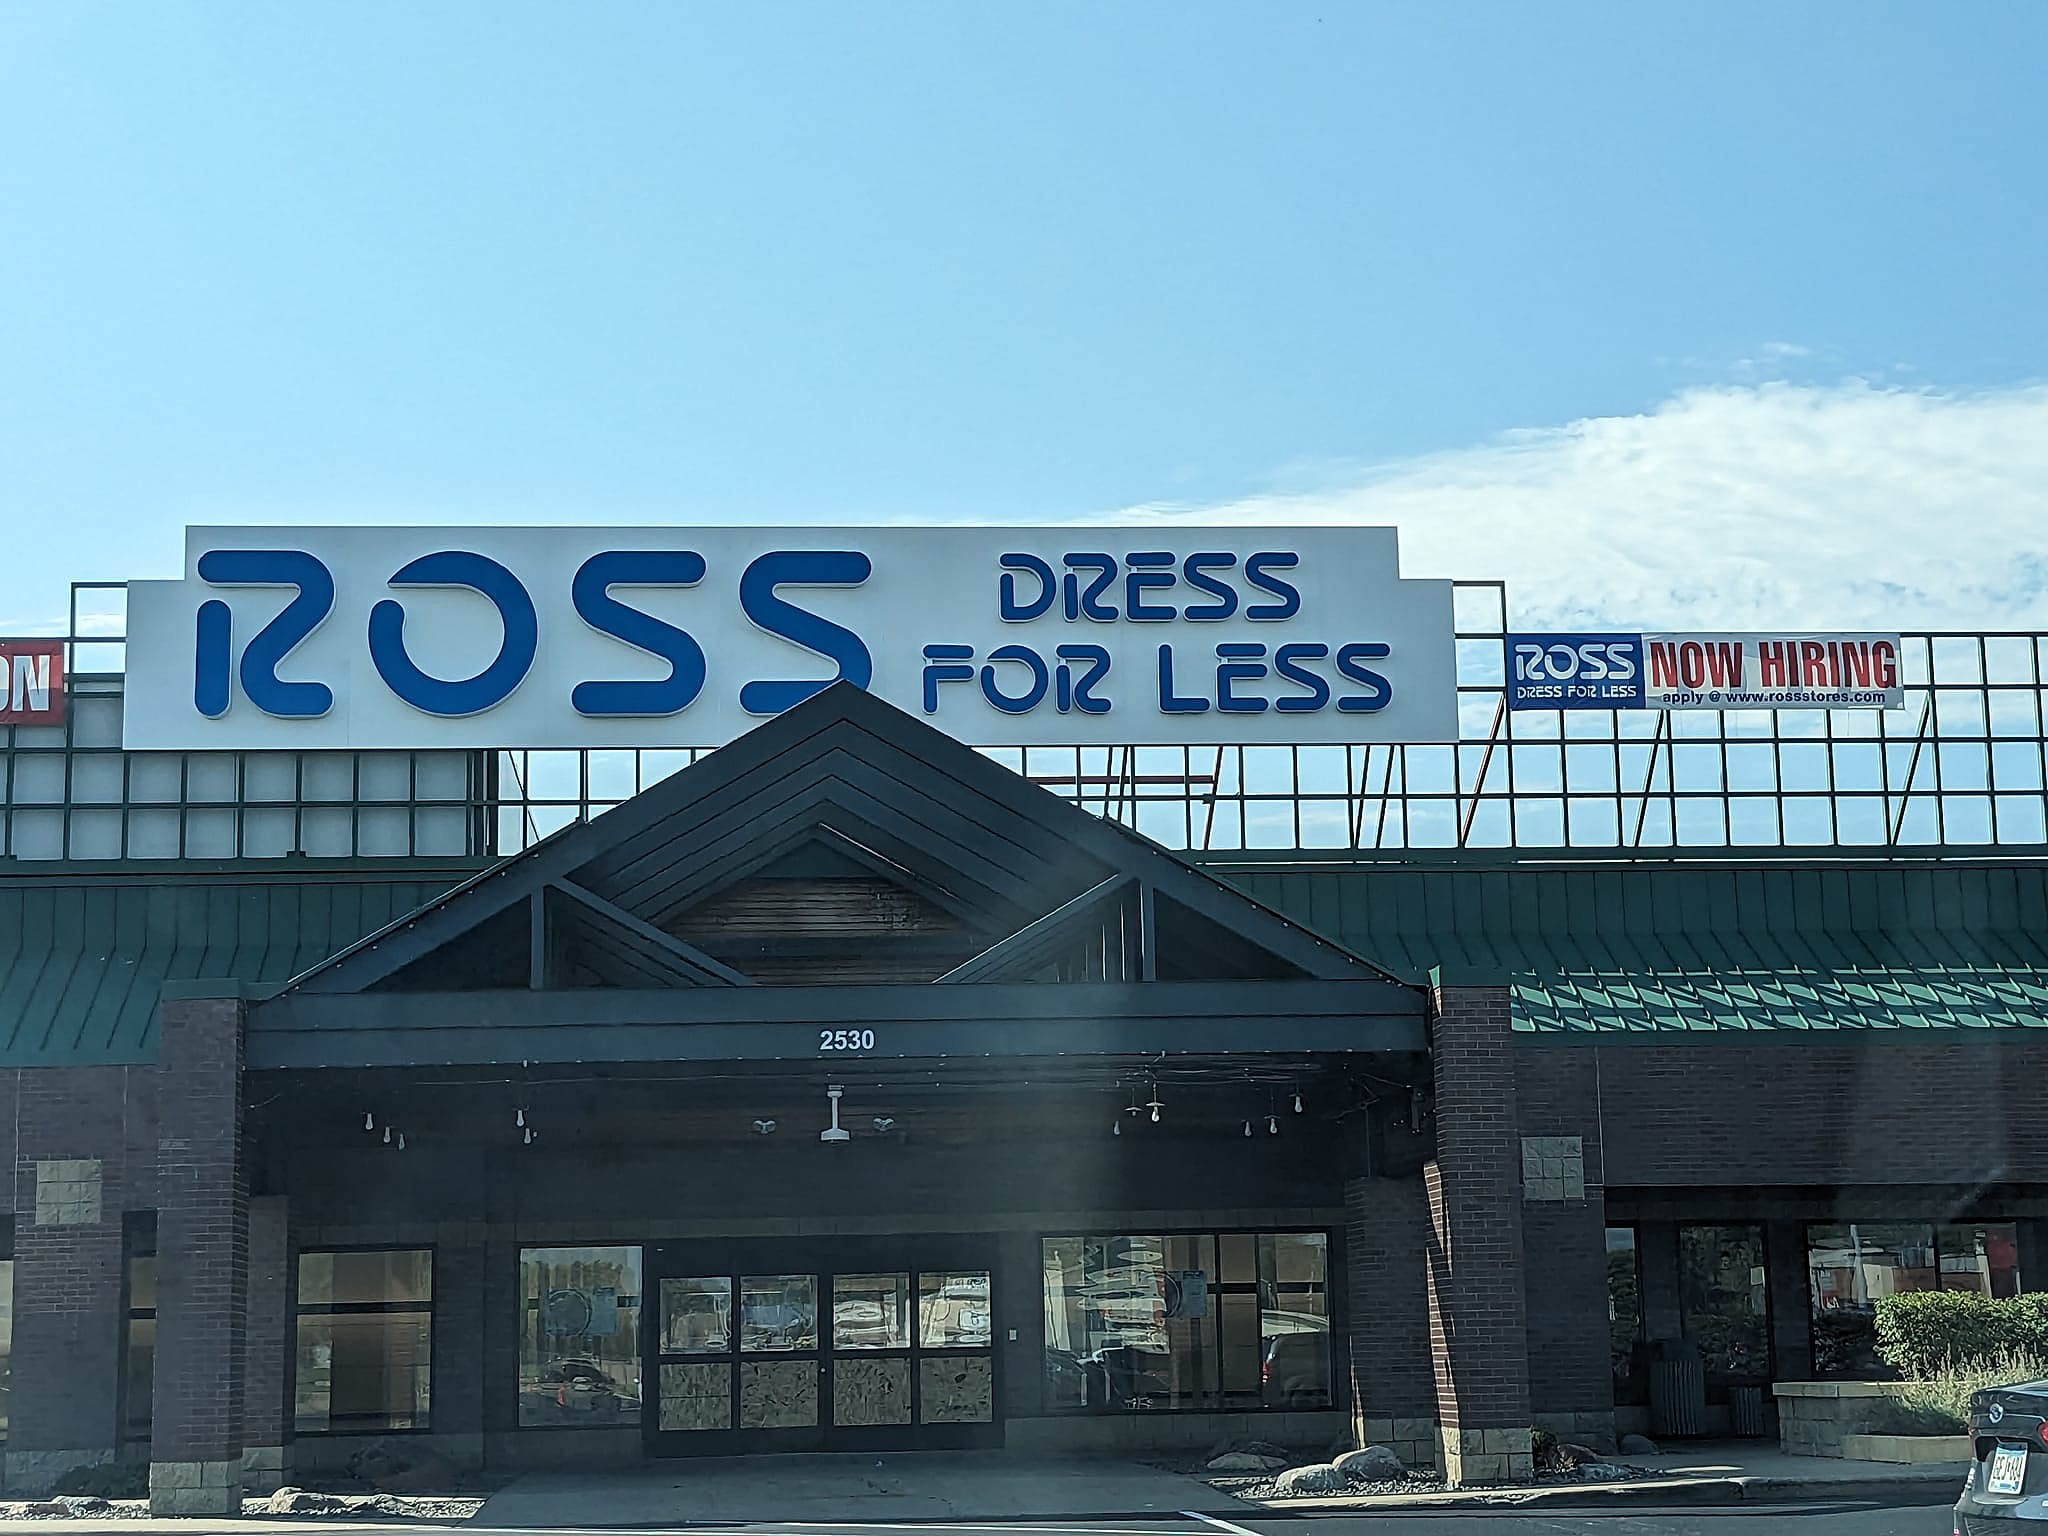 Woodbridge's Marumsco Plaza Fully Occupied With Ross Dress For Less Lease –  Commercial Observer